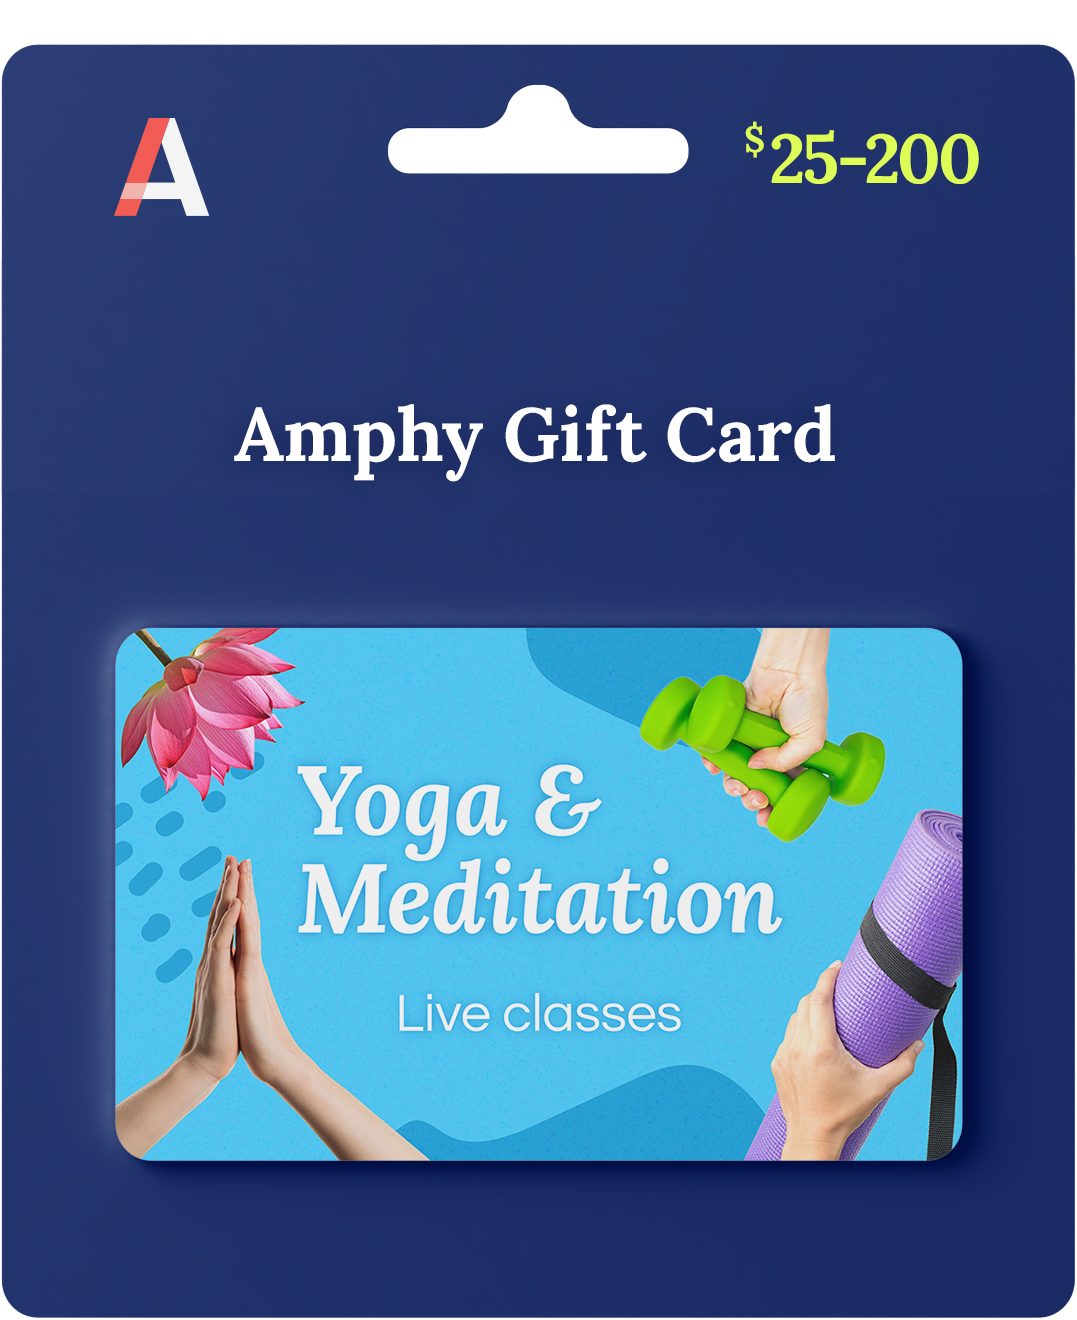 Amphy gift card (Credit: Adcore inc)